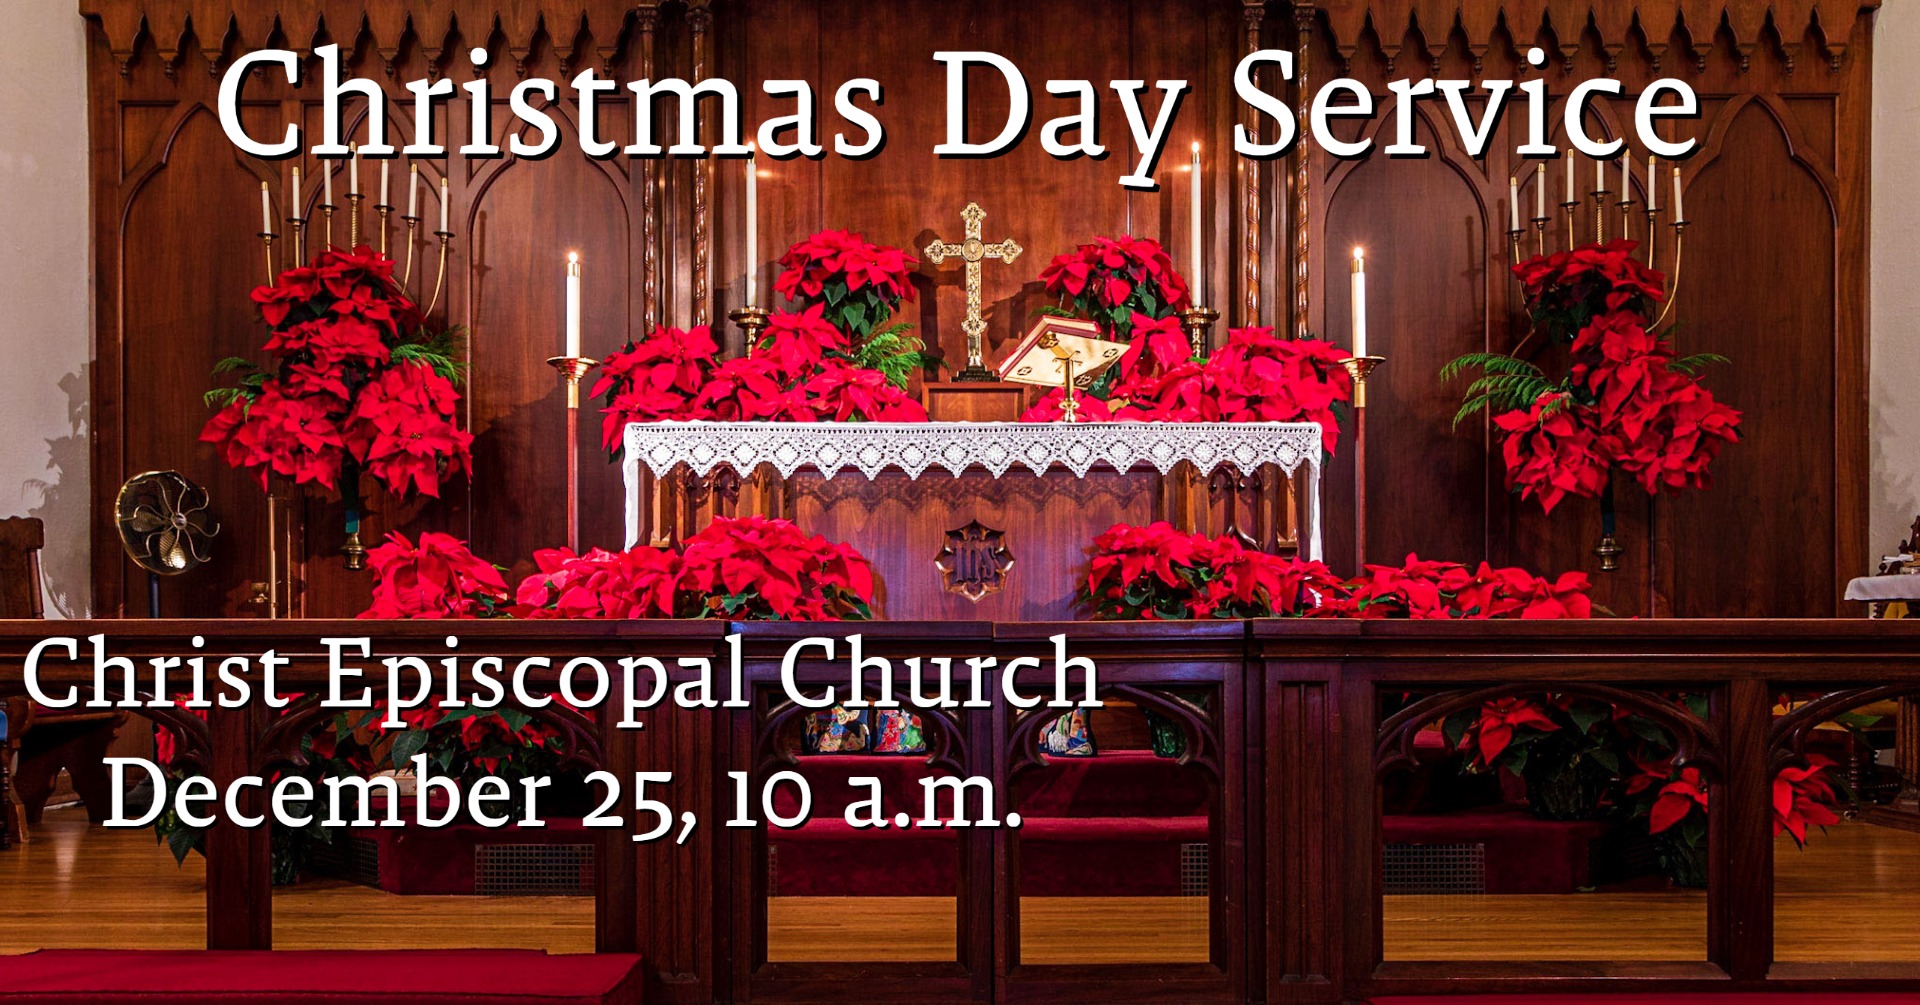 Christmas Day Service at Christ Episcopal